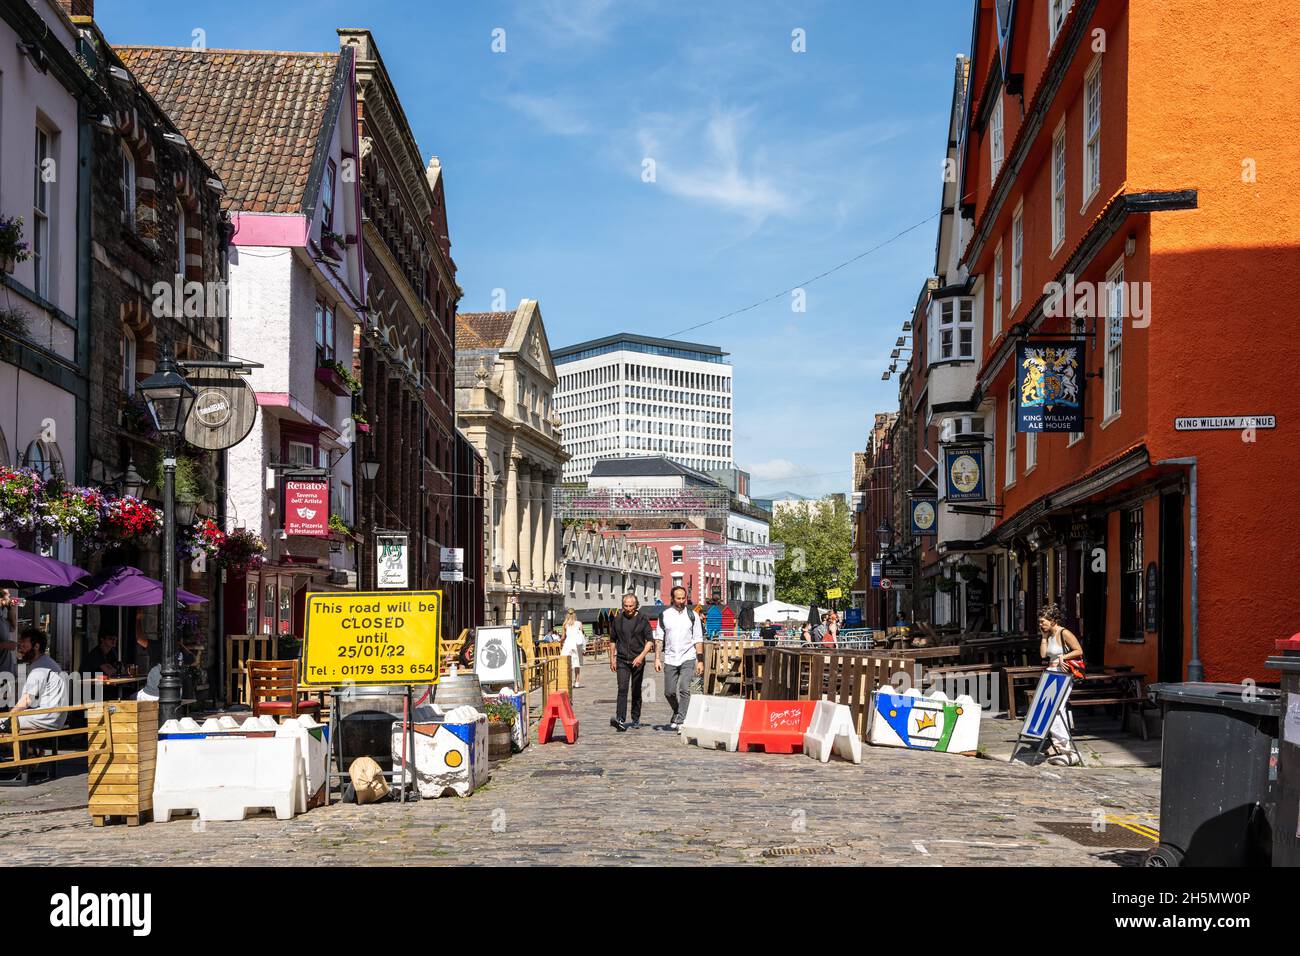 Outdoor tables fill a street if bars and restaurants that is closed to motor traffic during the Covid-19 pandemic in Bristol, England. Stock Photo